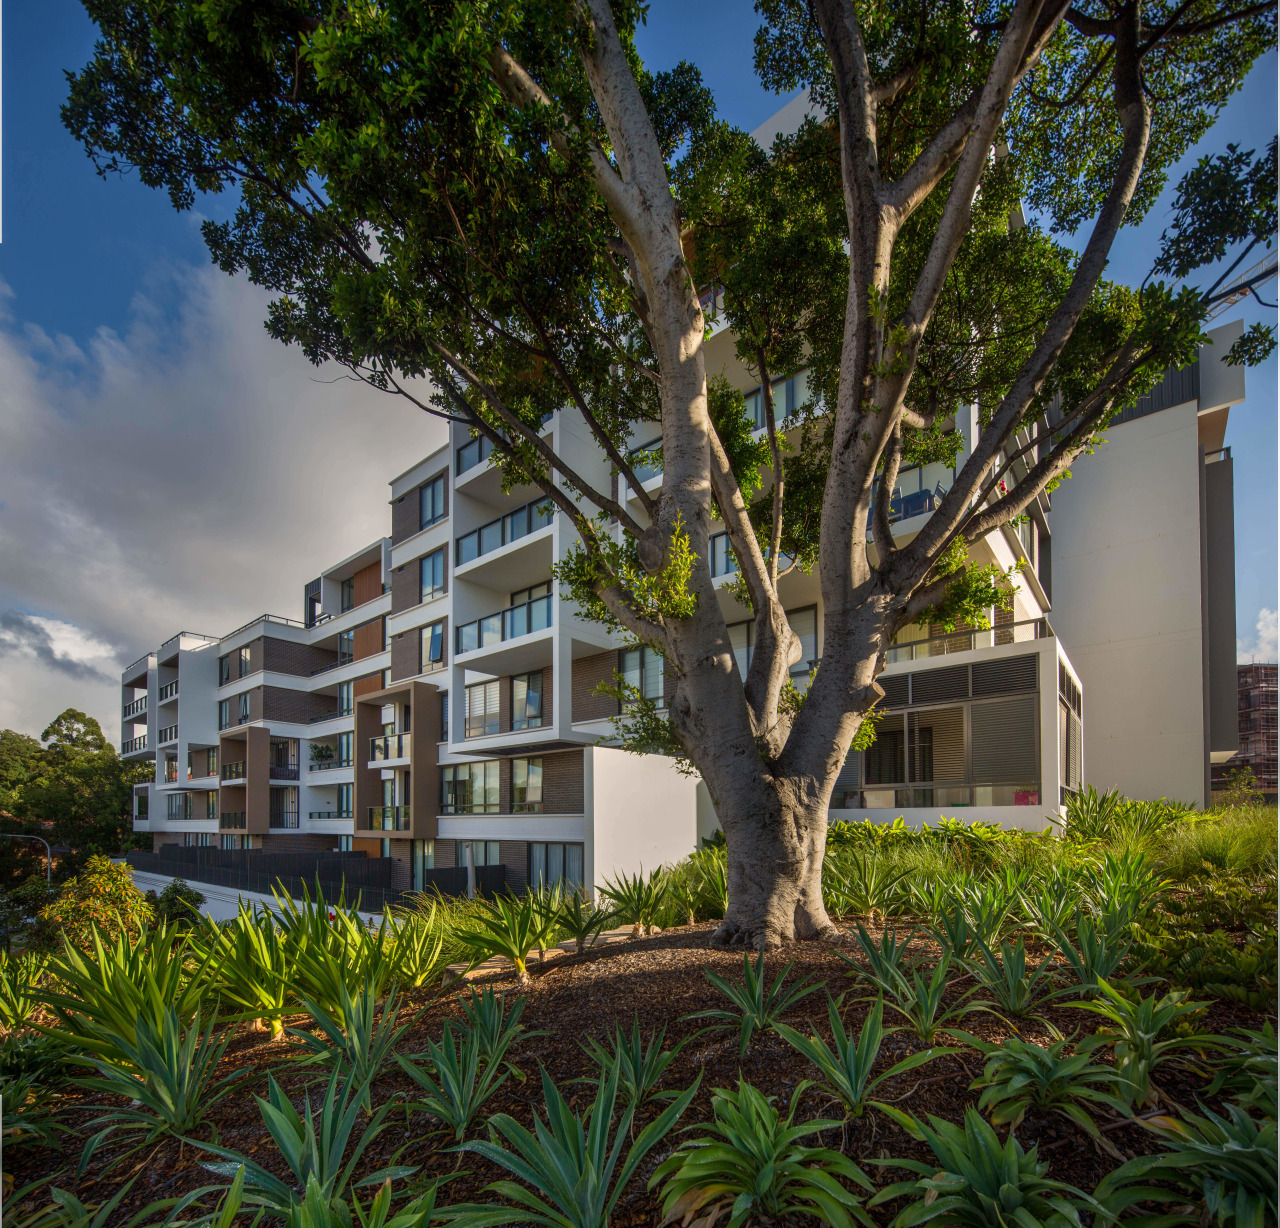 Putney Hill offers a tranquil lifestyle just twenty apartment, architecture, arecales, building, condominium, estate, home, house, mixed use, neighbourhood, plant, property, real estate, residential area, sky, tree, brown